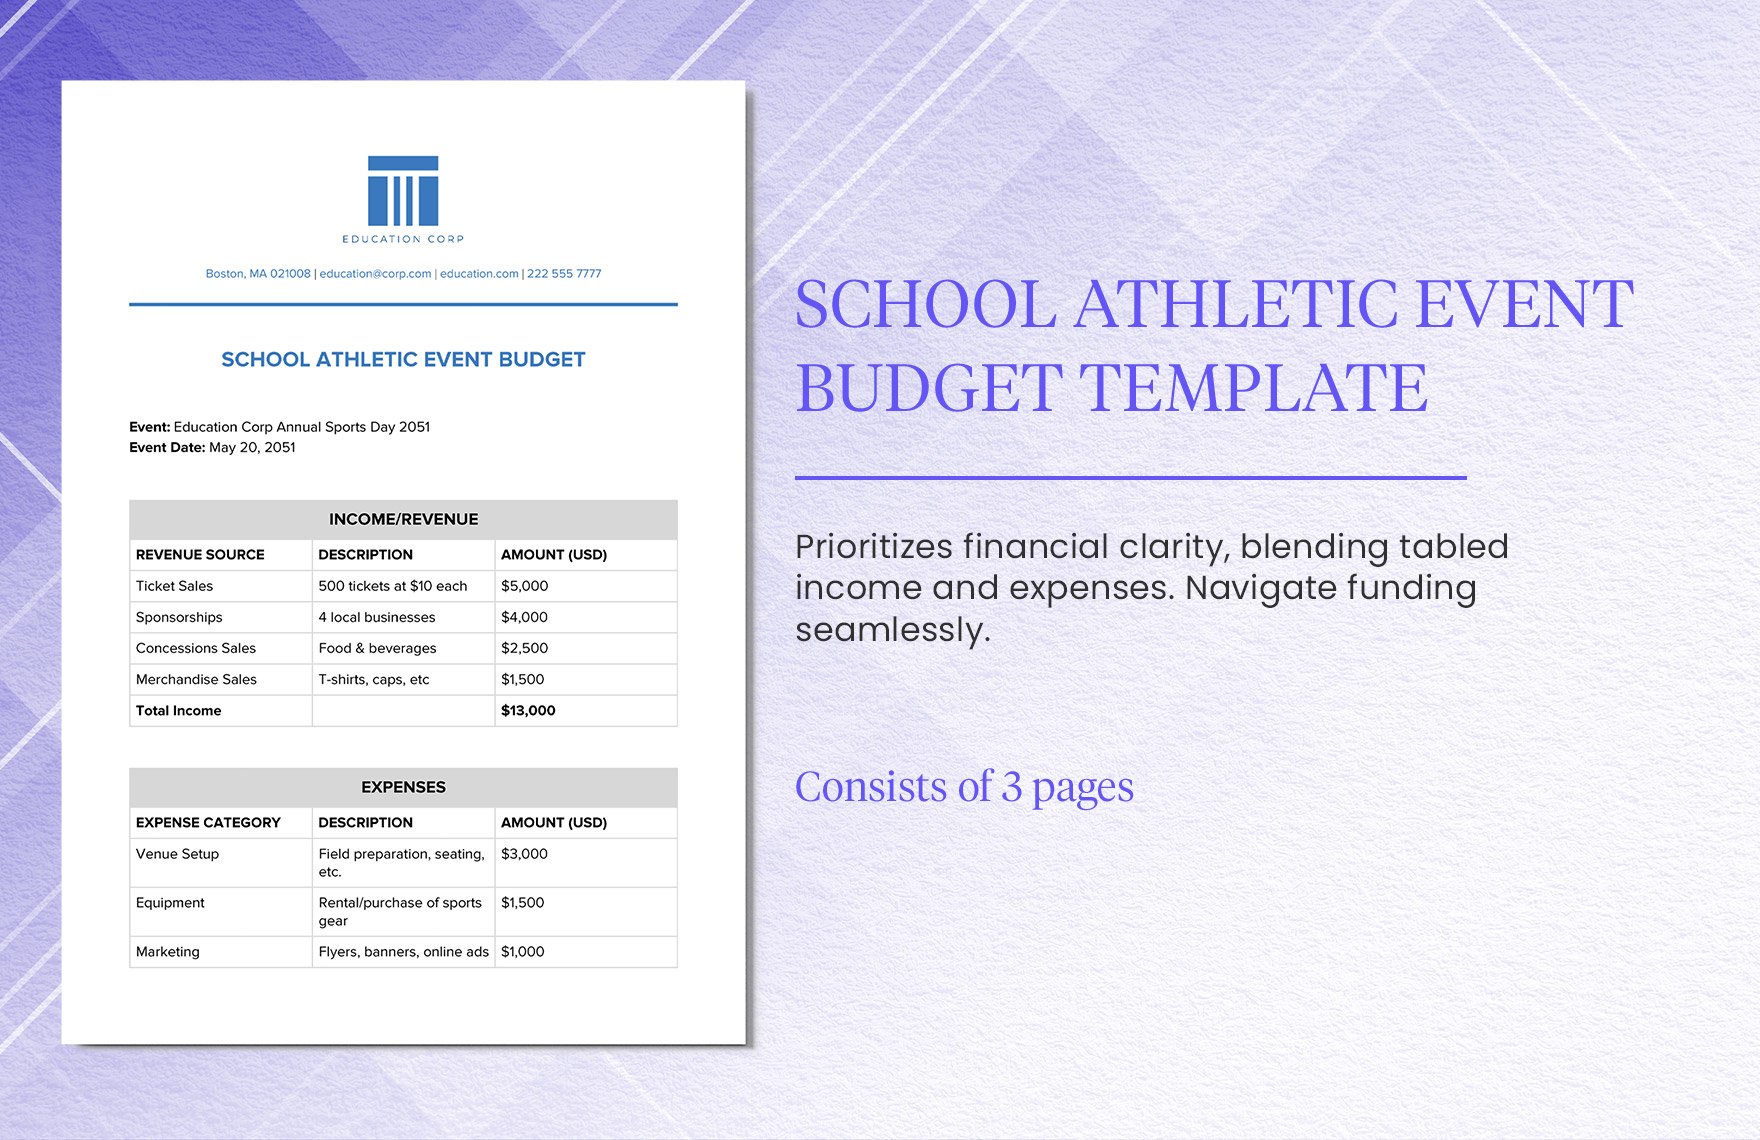 School Athletic Event Budget Template in Word, Google Docs, PDF